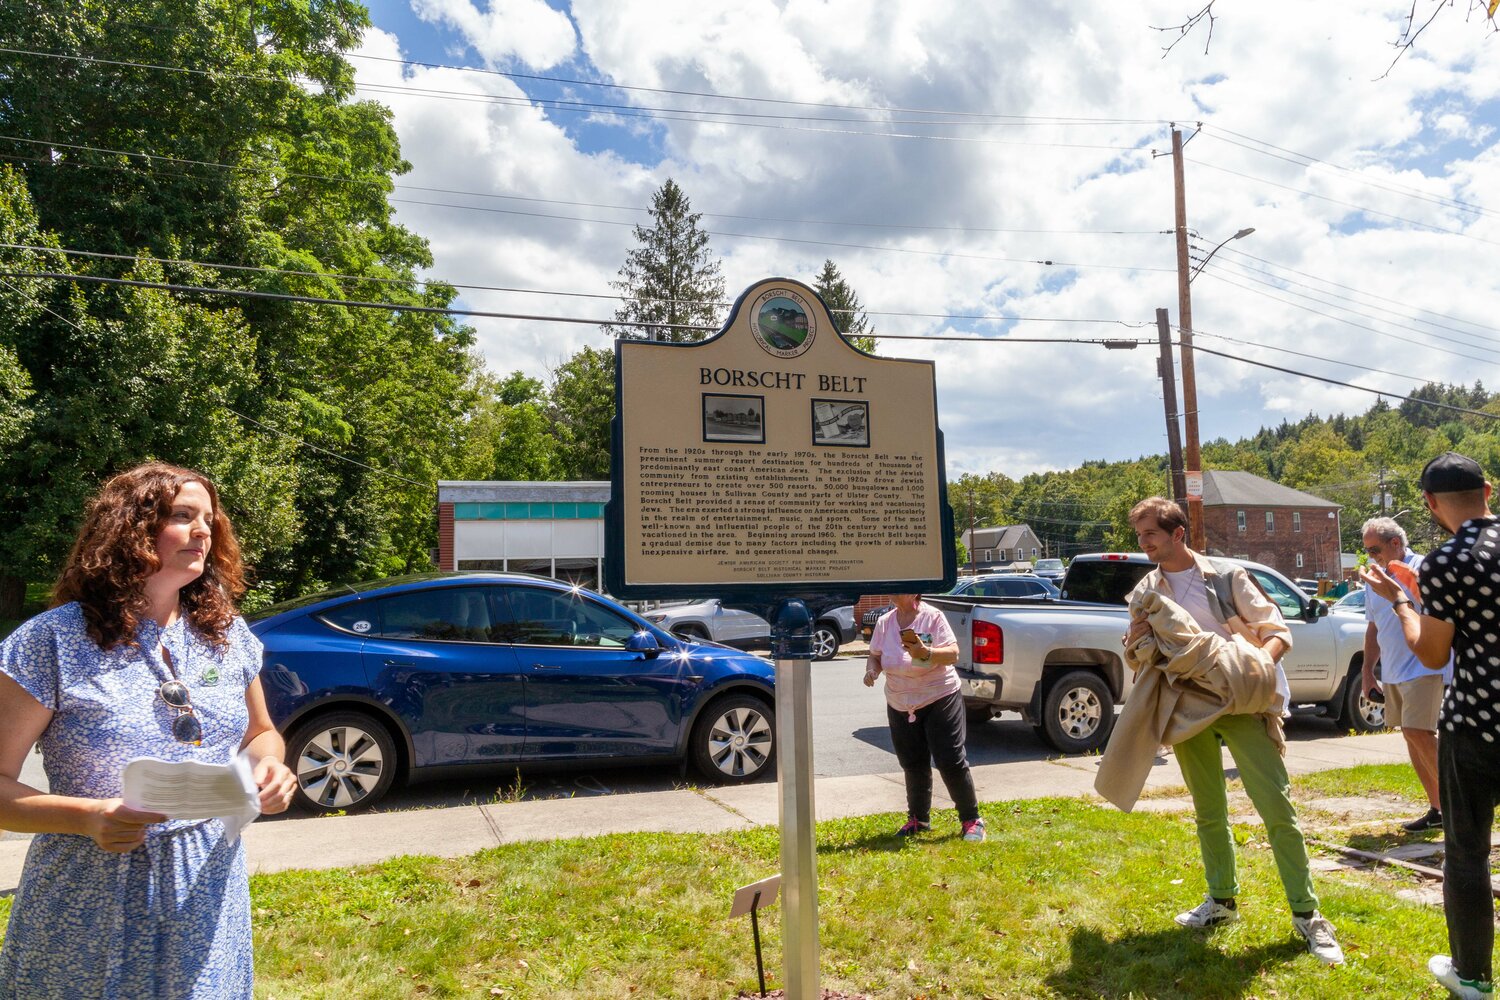 Marisa Scheinfeld, left, and Isaac Jeffreys jointly reveal the Mountaindale Borscht Belt Road Marker. This marker stands as a commemoration and educational symbol, shedding light on the historical significance of the Borscht Belt Era within the context of Mountaindale’s history.